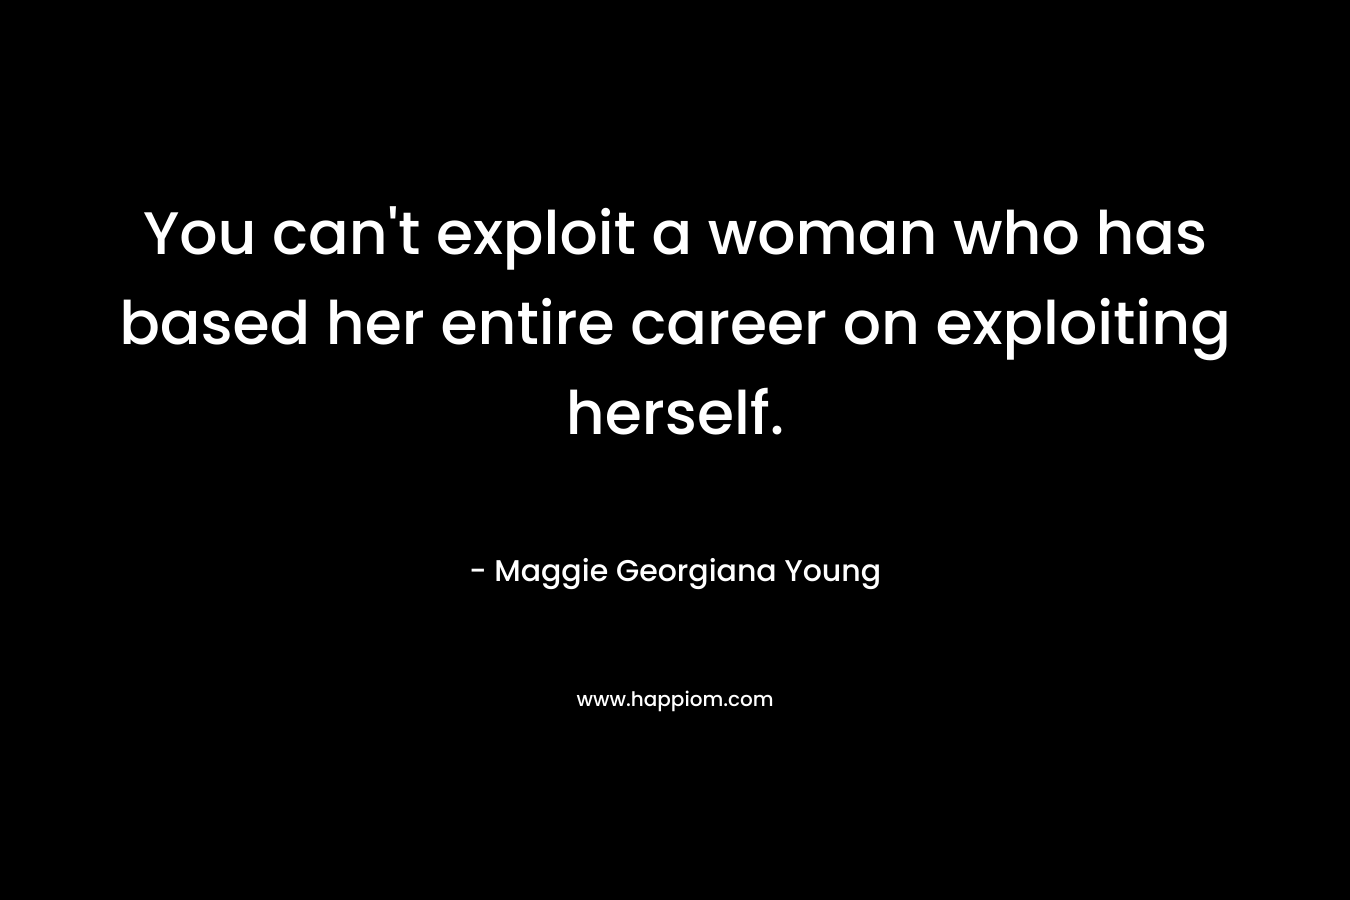 You can't exploit a woman who has based her entire career on exploiting herself.